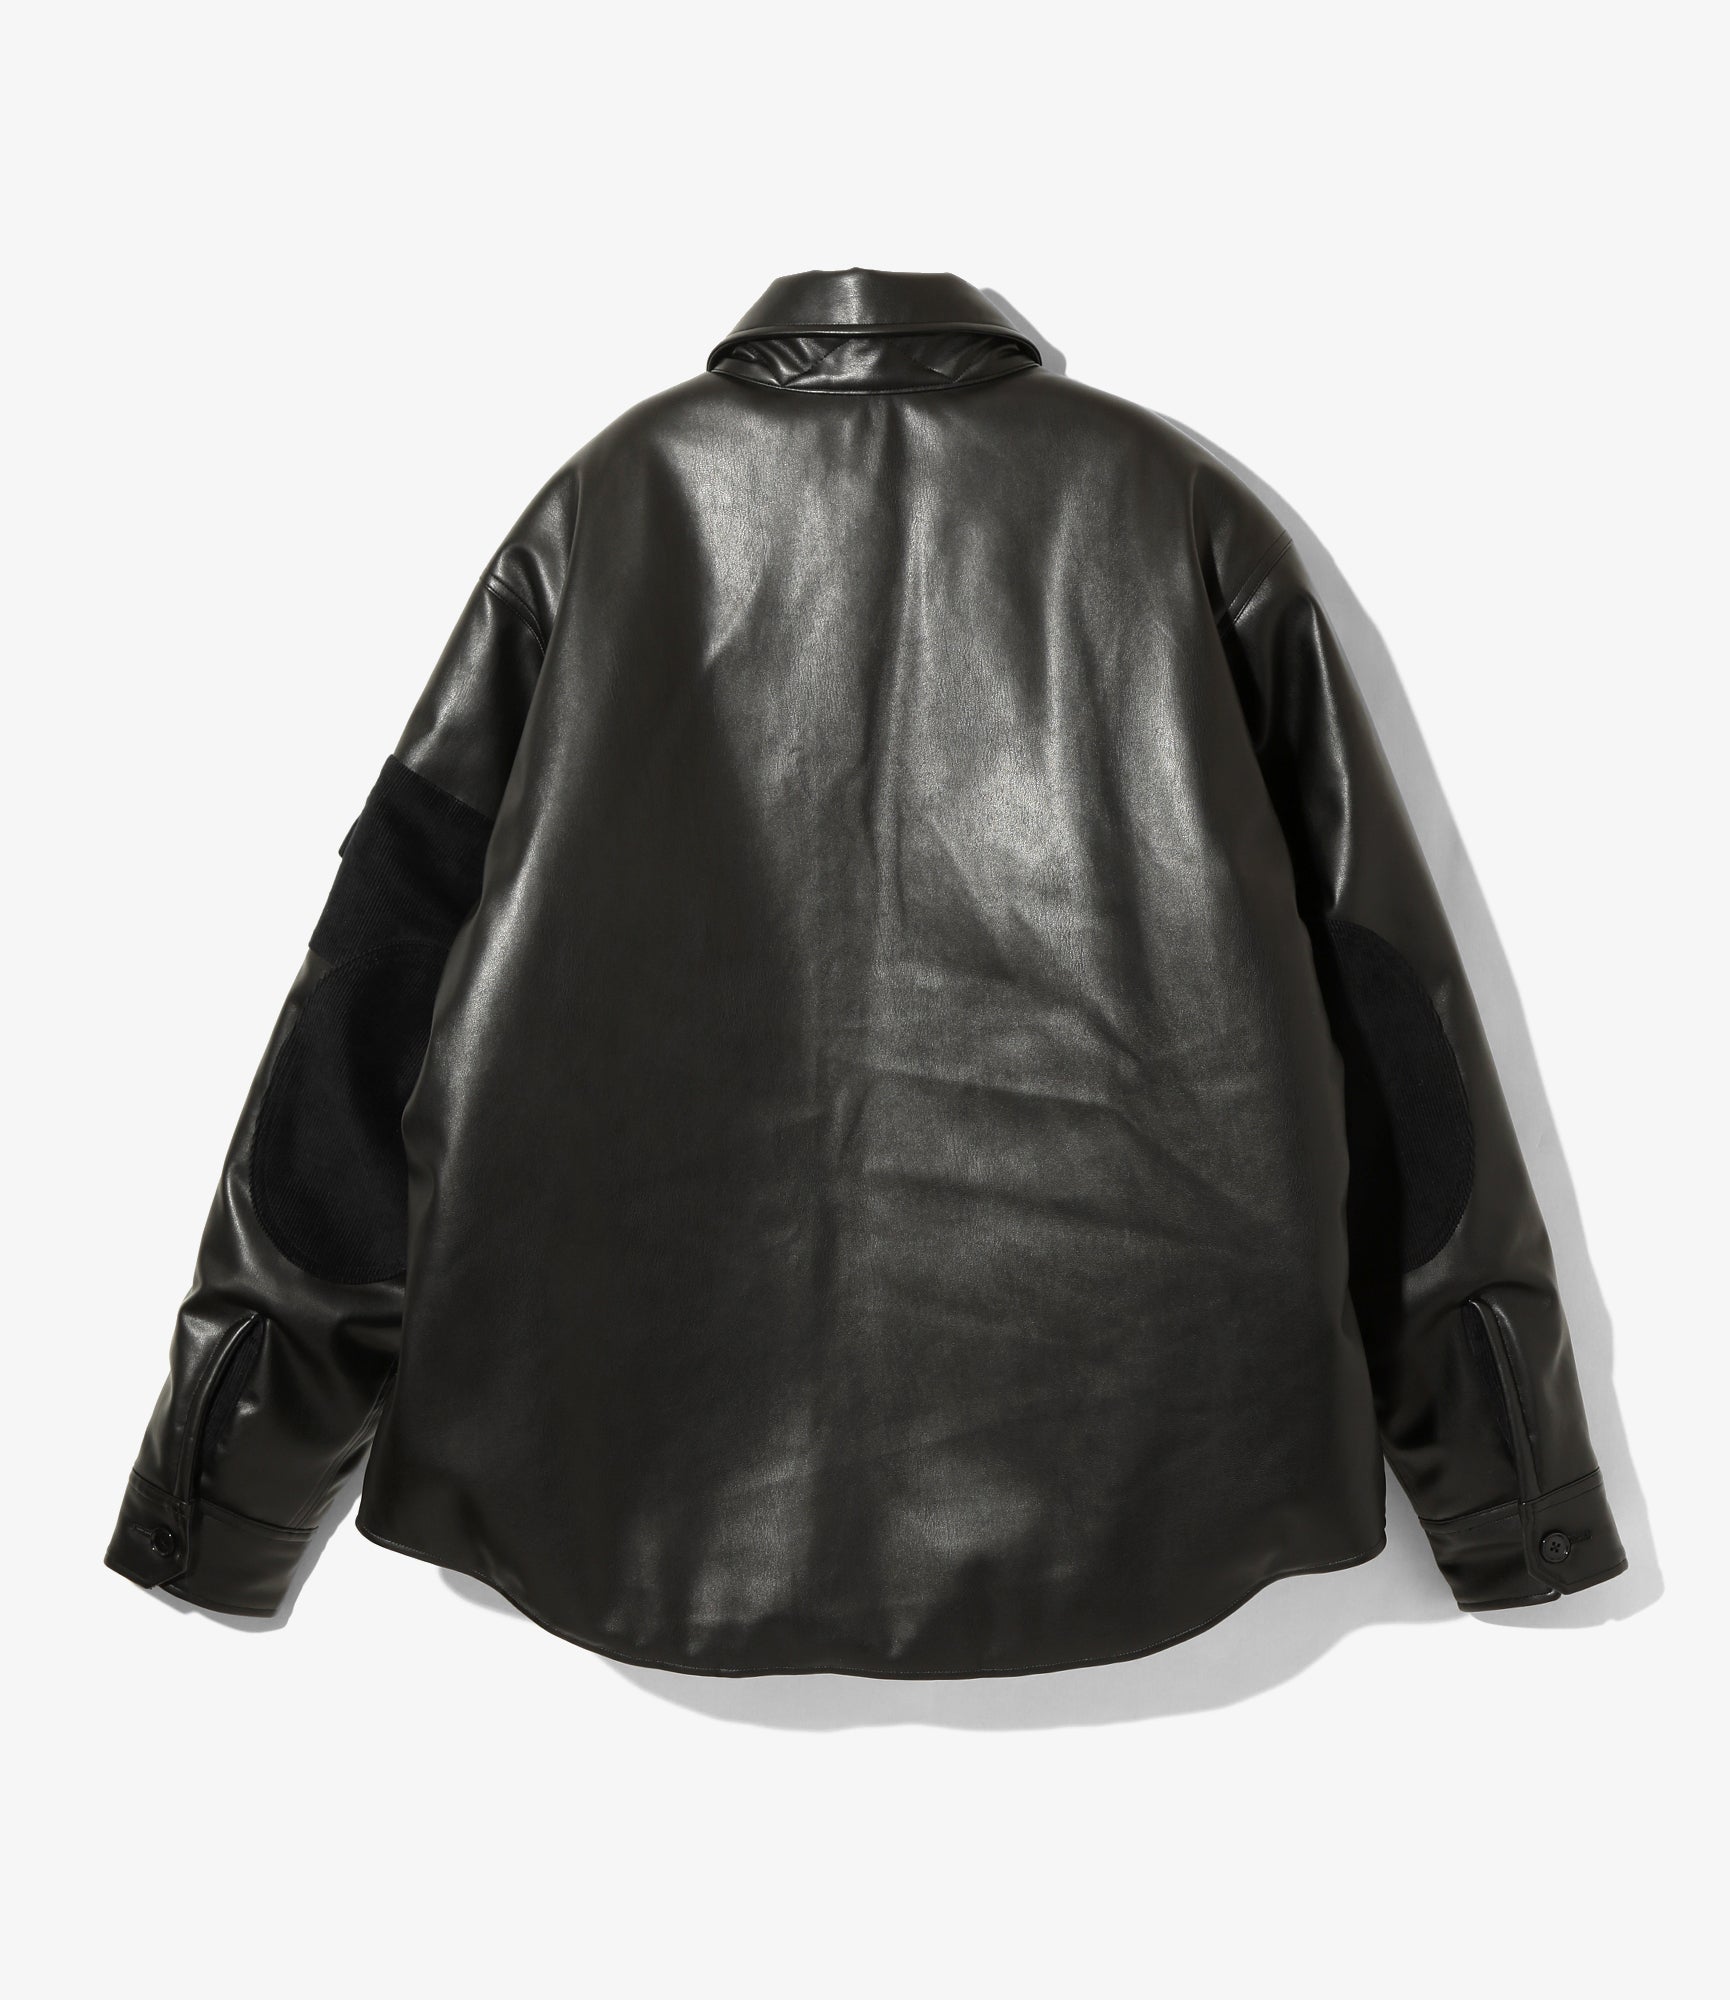 AiE Insulation CCPO Shirt - Synthetic Leather - Black